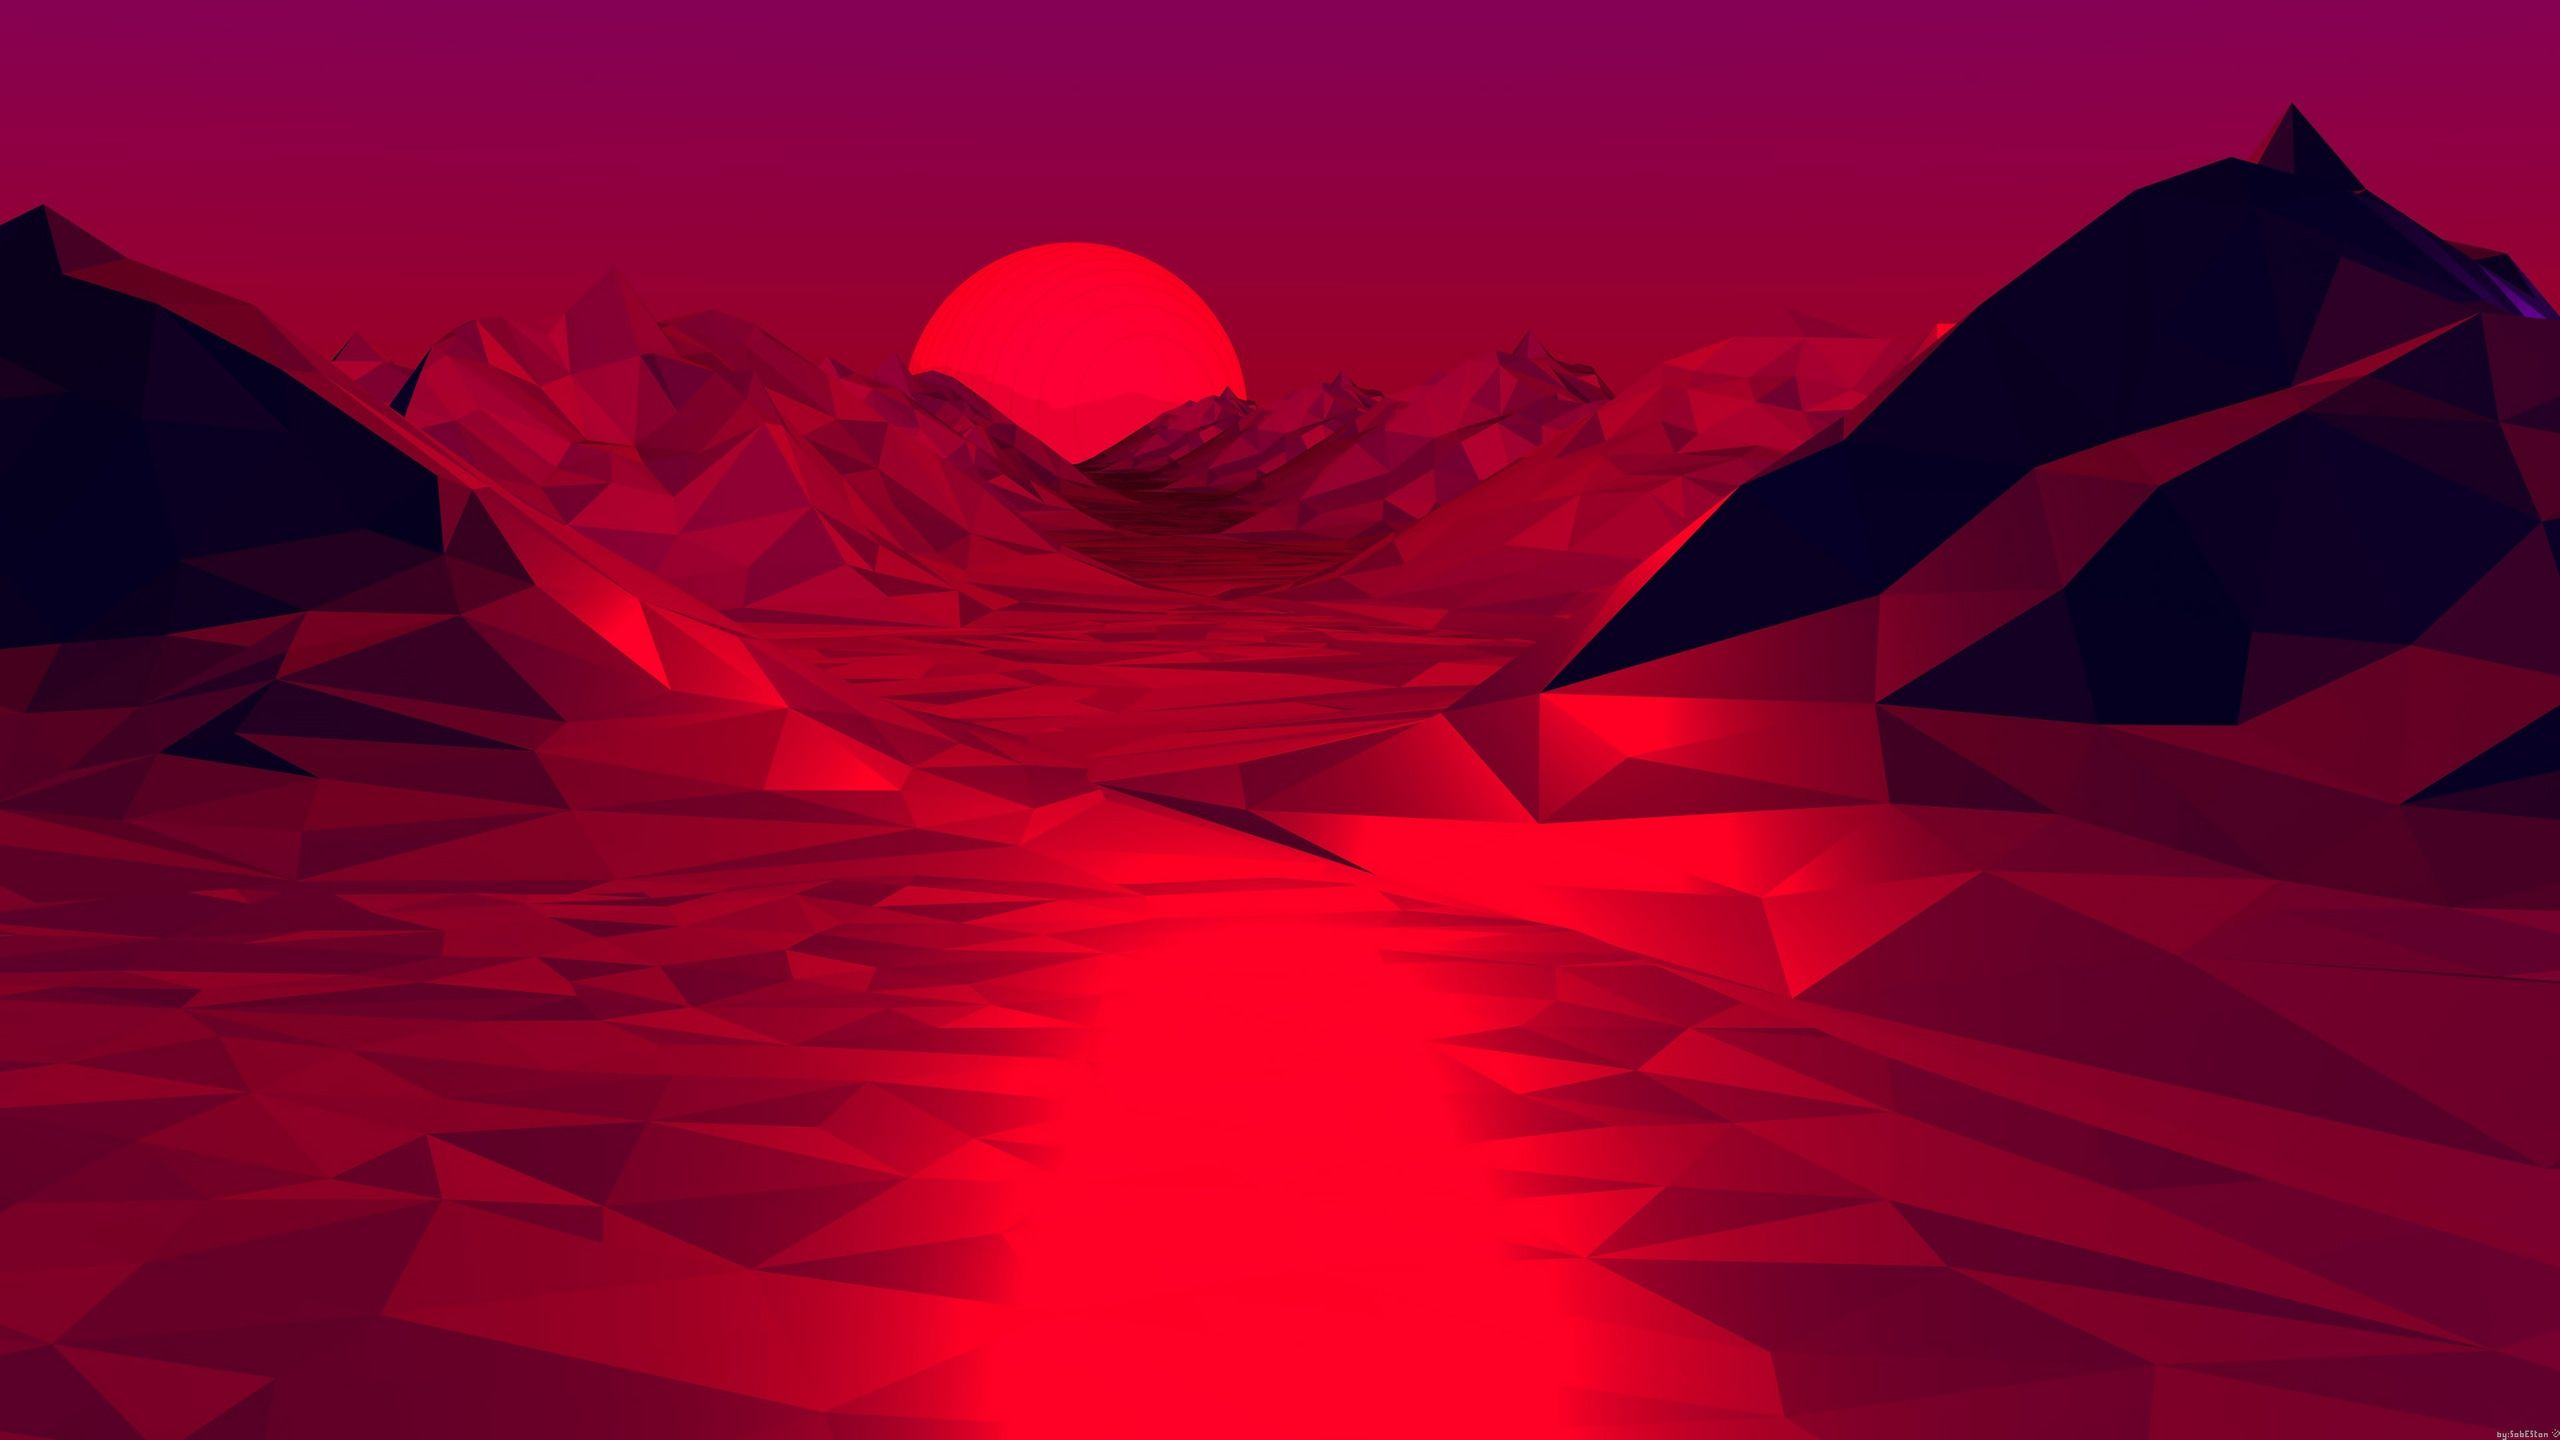 Red abstract landscape wallpaper 2560x1600 - Red, 3D, low poly